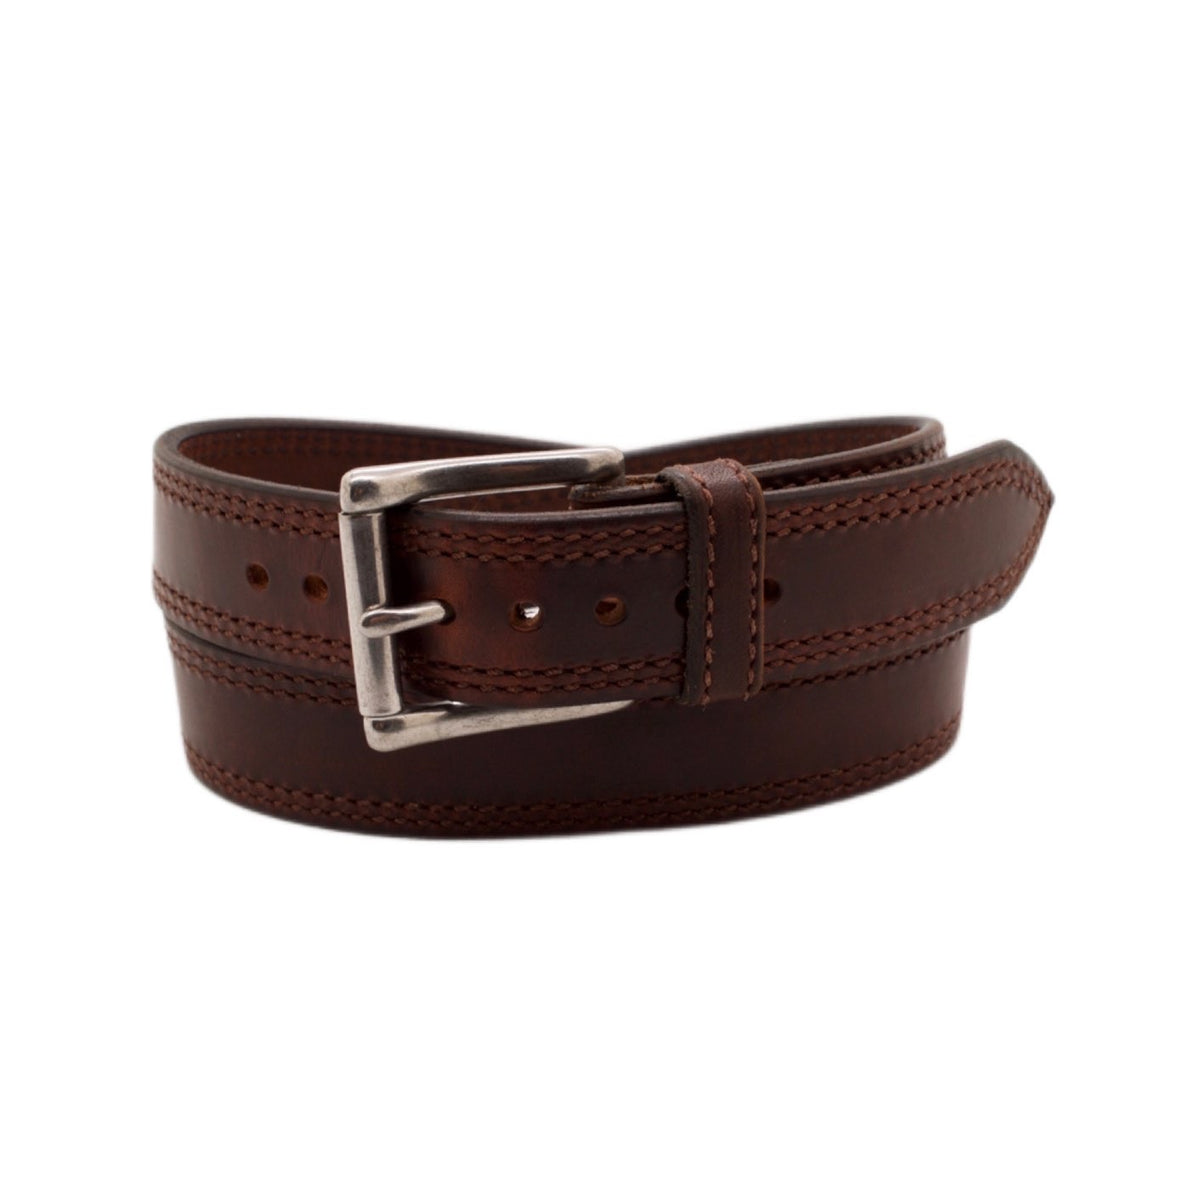 The SEQUOIA 1.5 Leather Belt